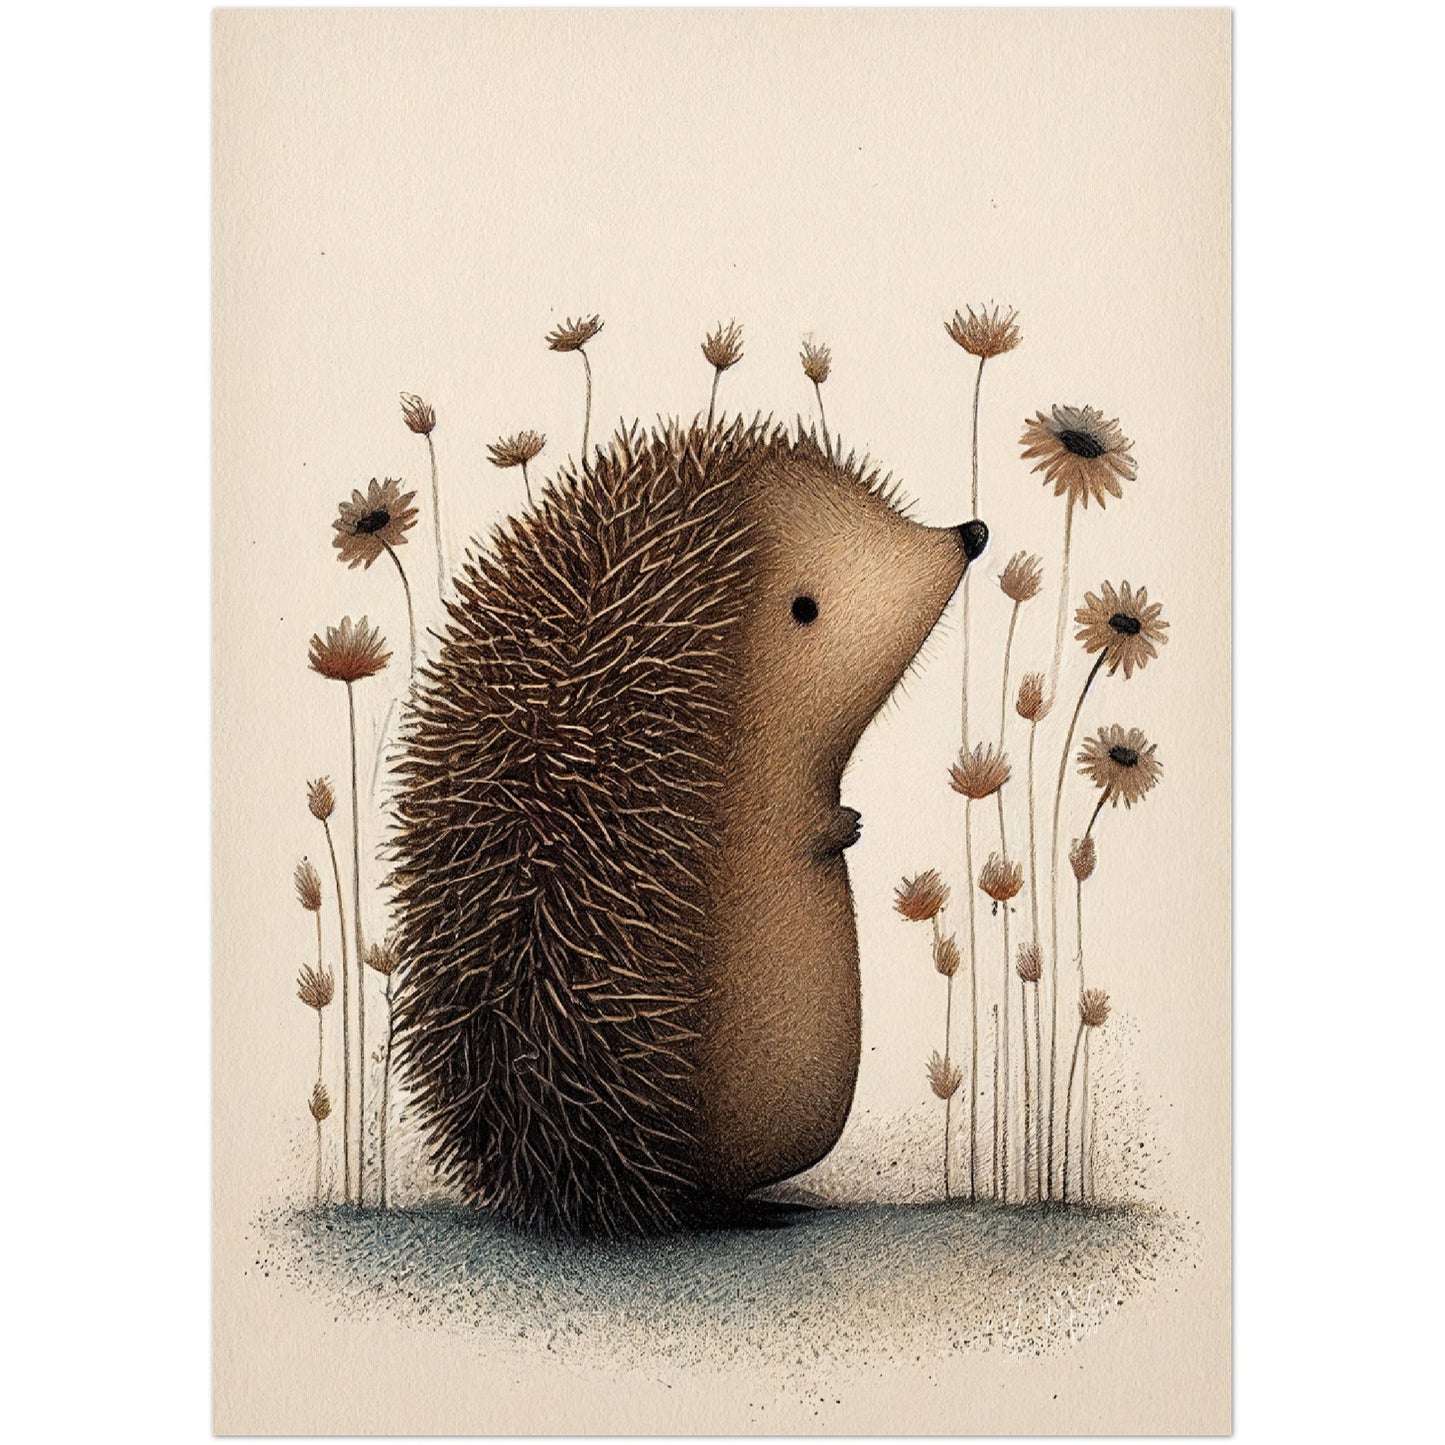 »Hedgehog Snuffle and Zone Out« retro poster